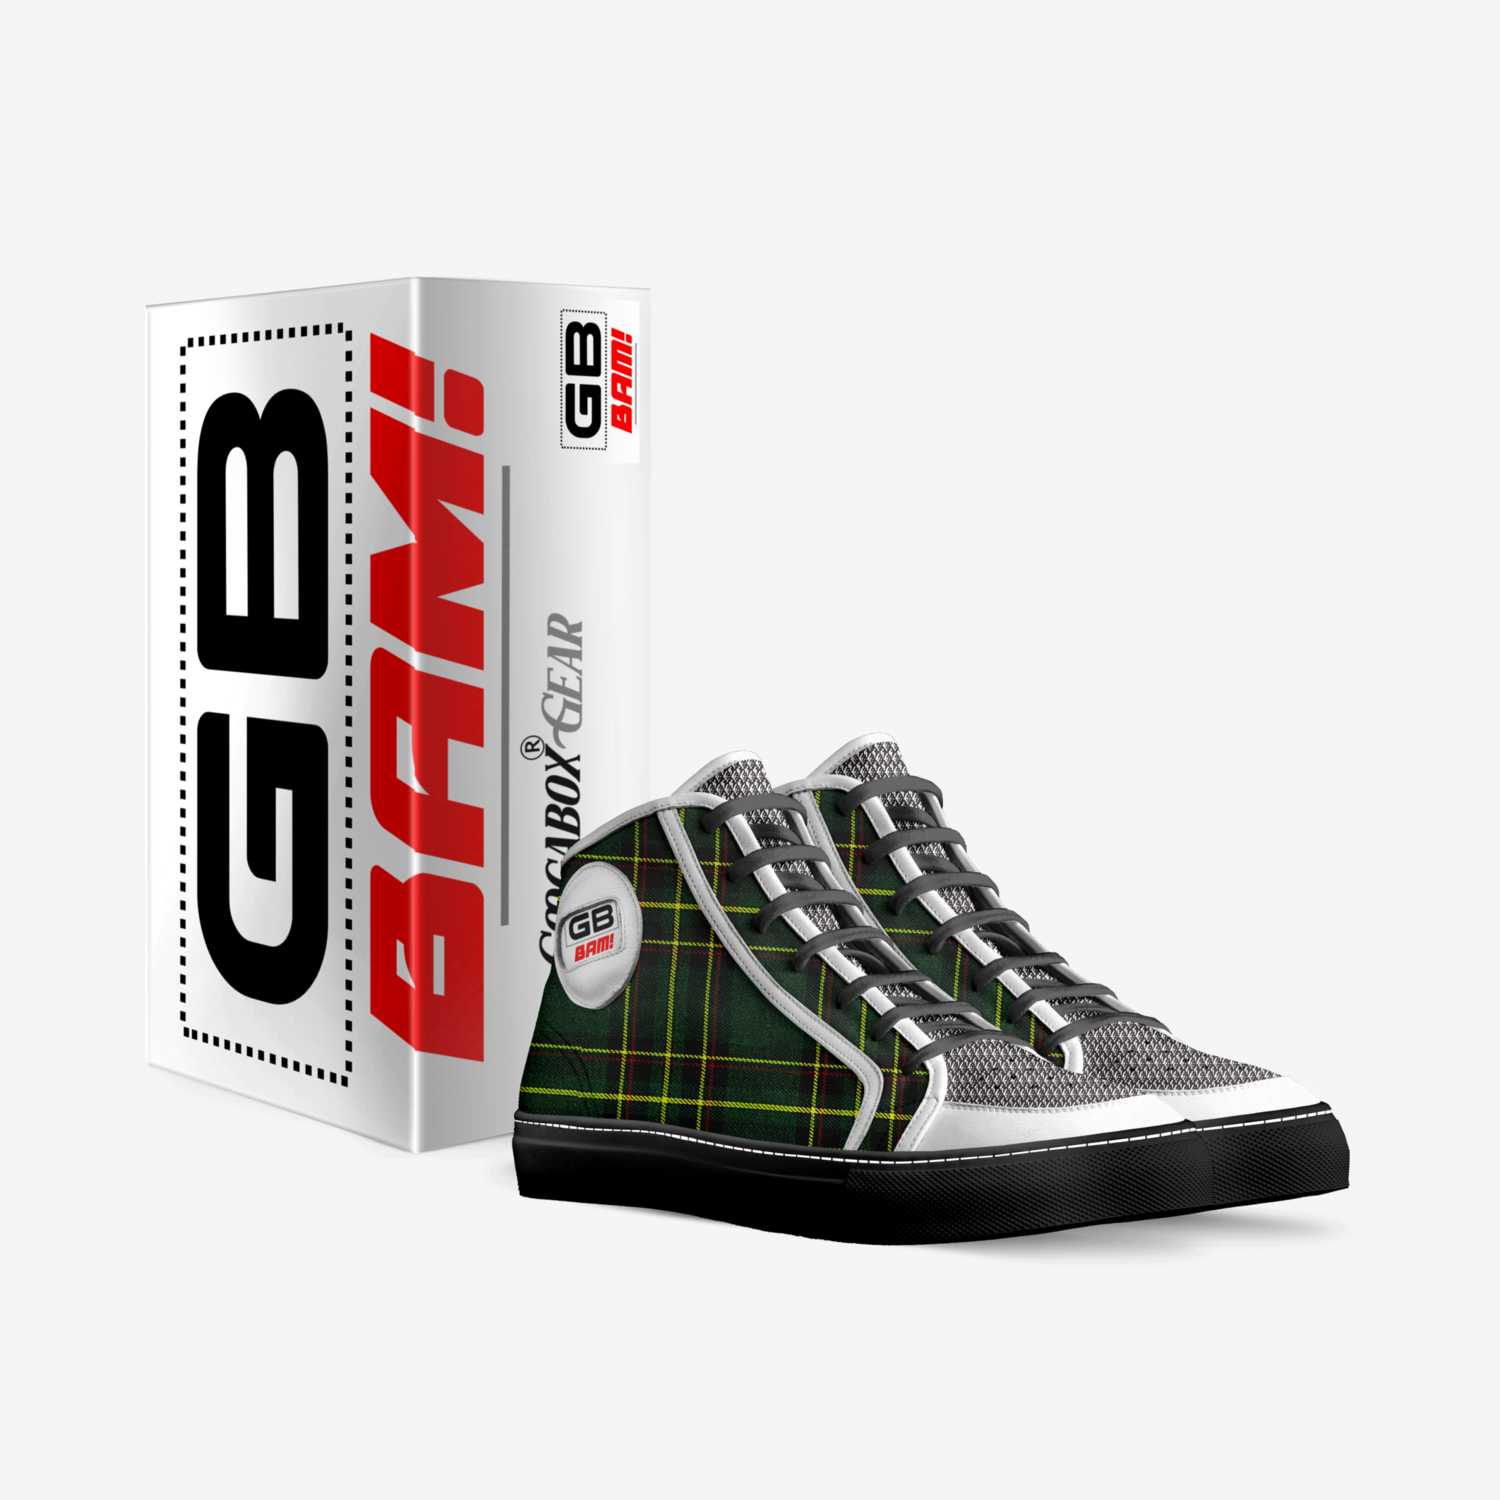 GOOGABOX BAM! custom made in Italy shoes by GOOGABOX (GWI) | Box view